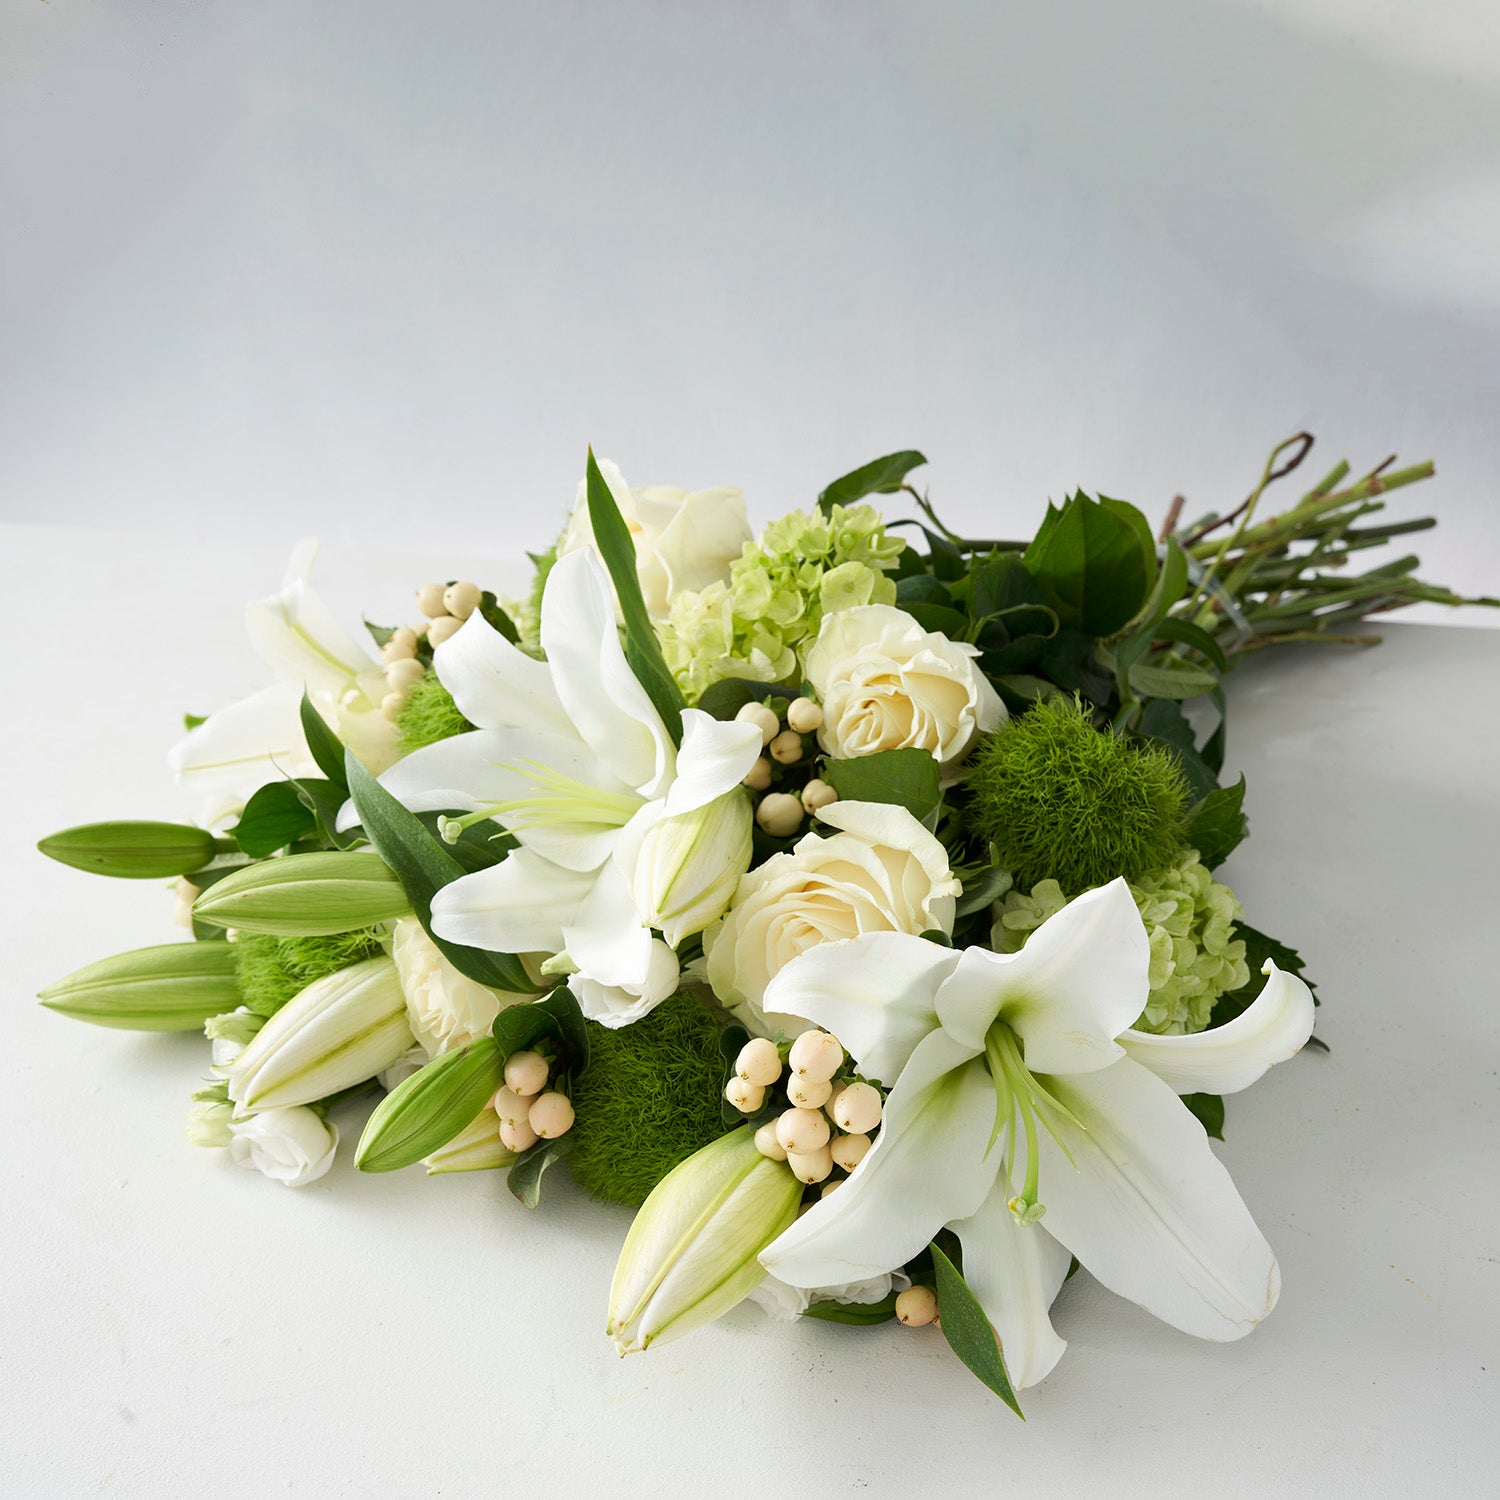 White Mondial roses and white lilies  with cream berries and green hydrangea on white background.